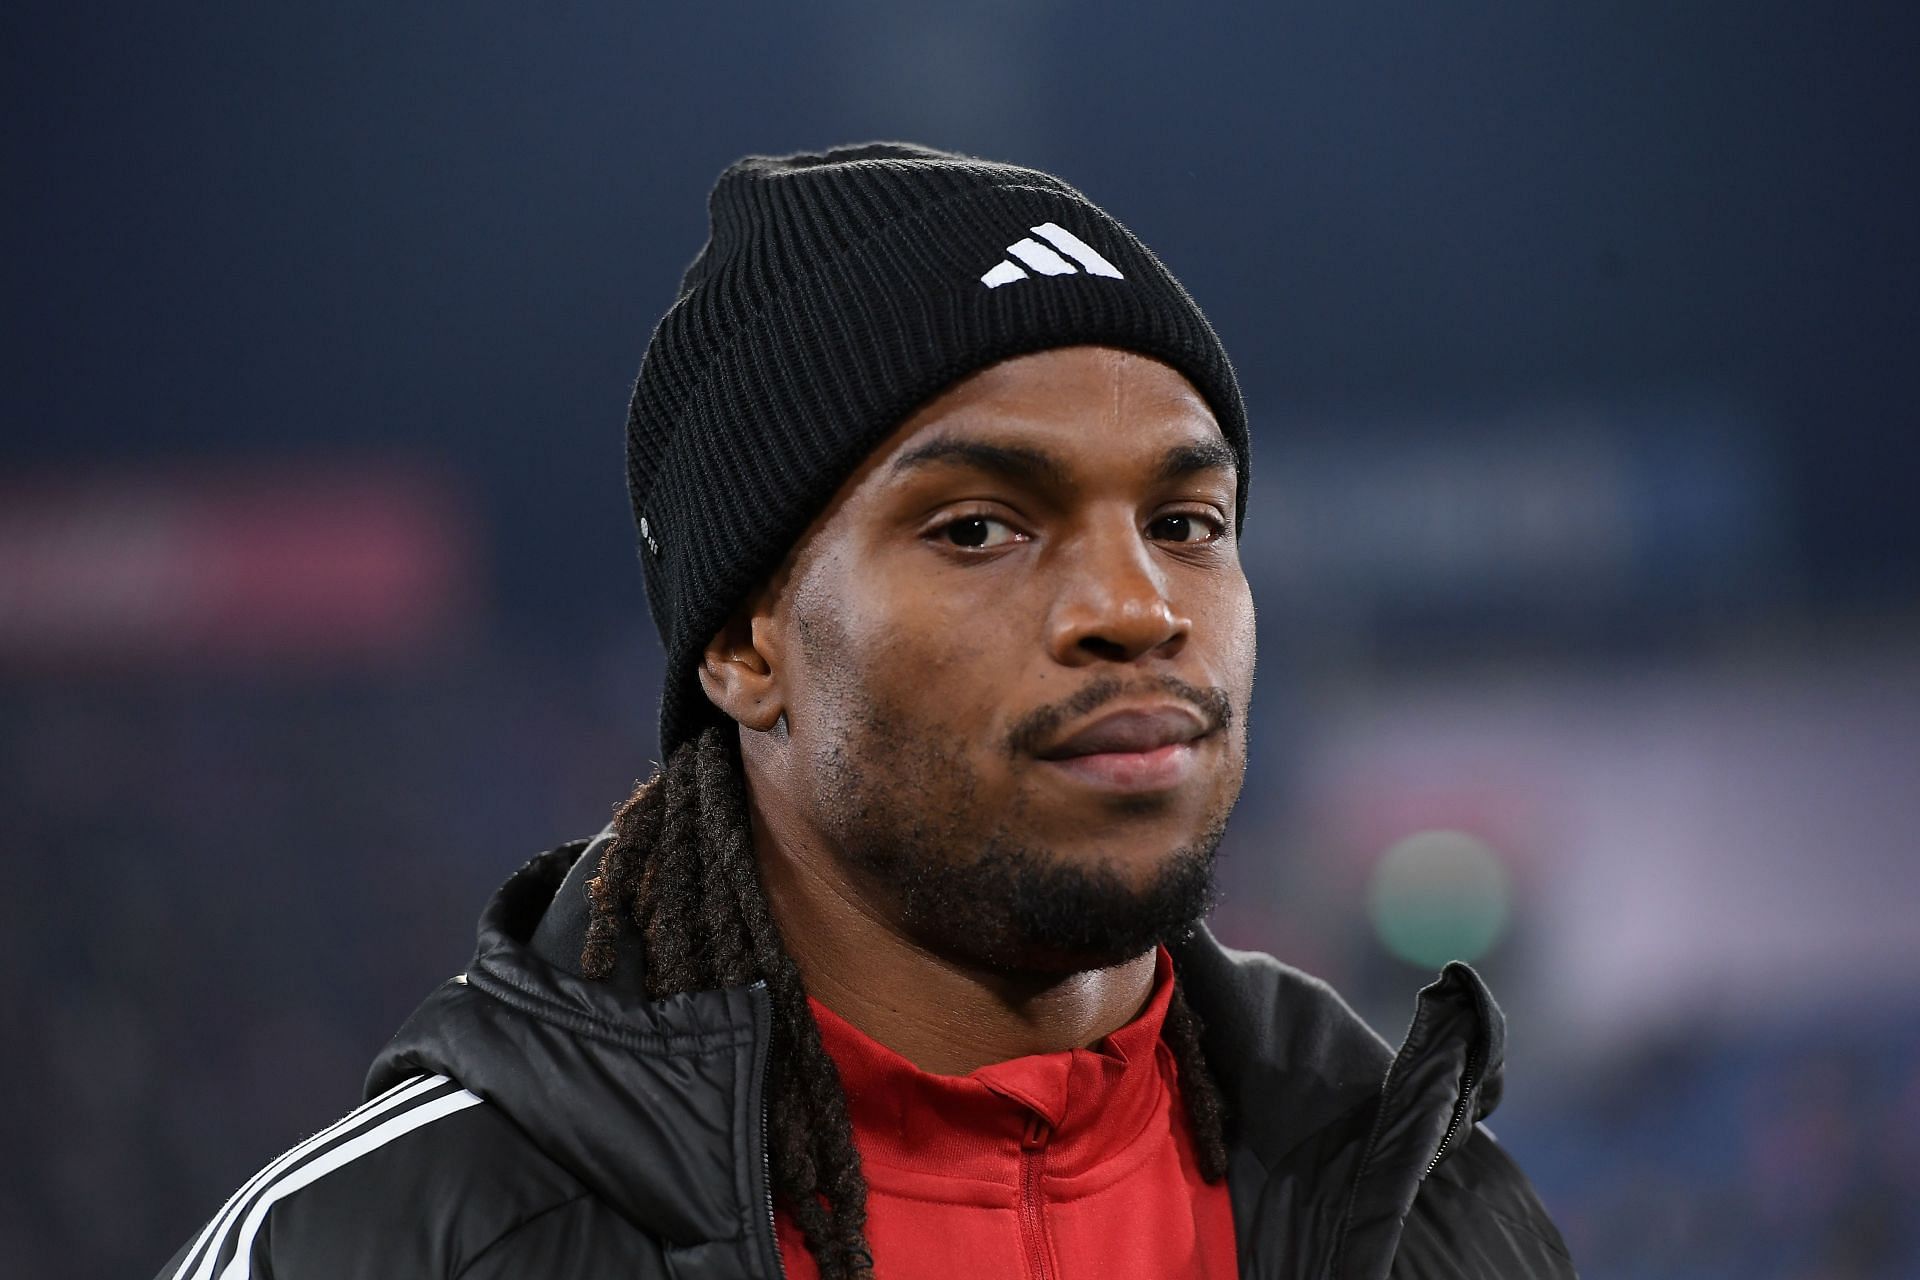 Renato Sanches could be available for transfer this month.